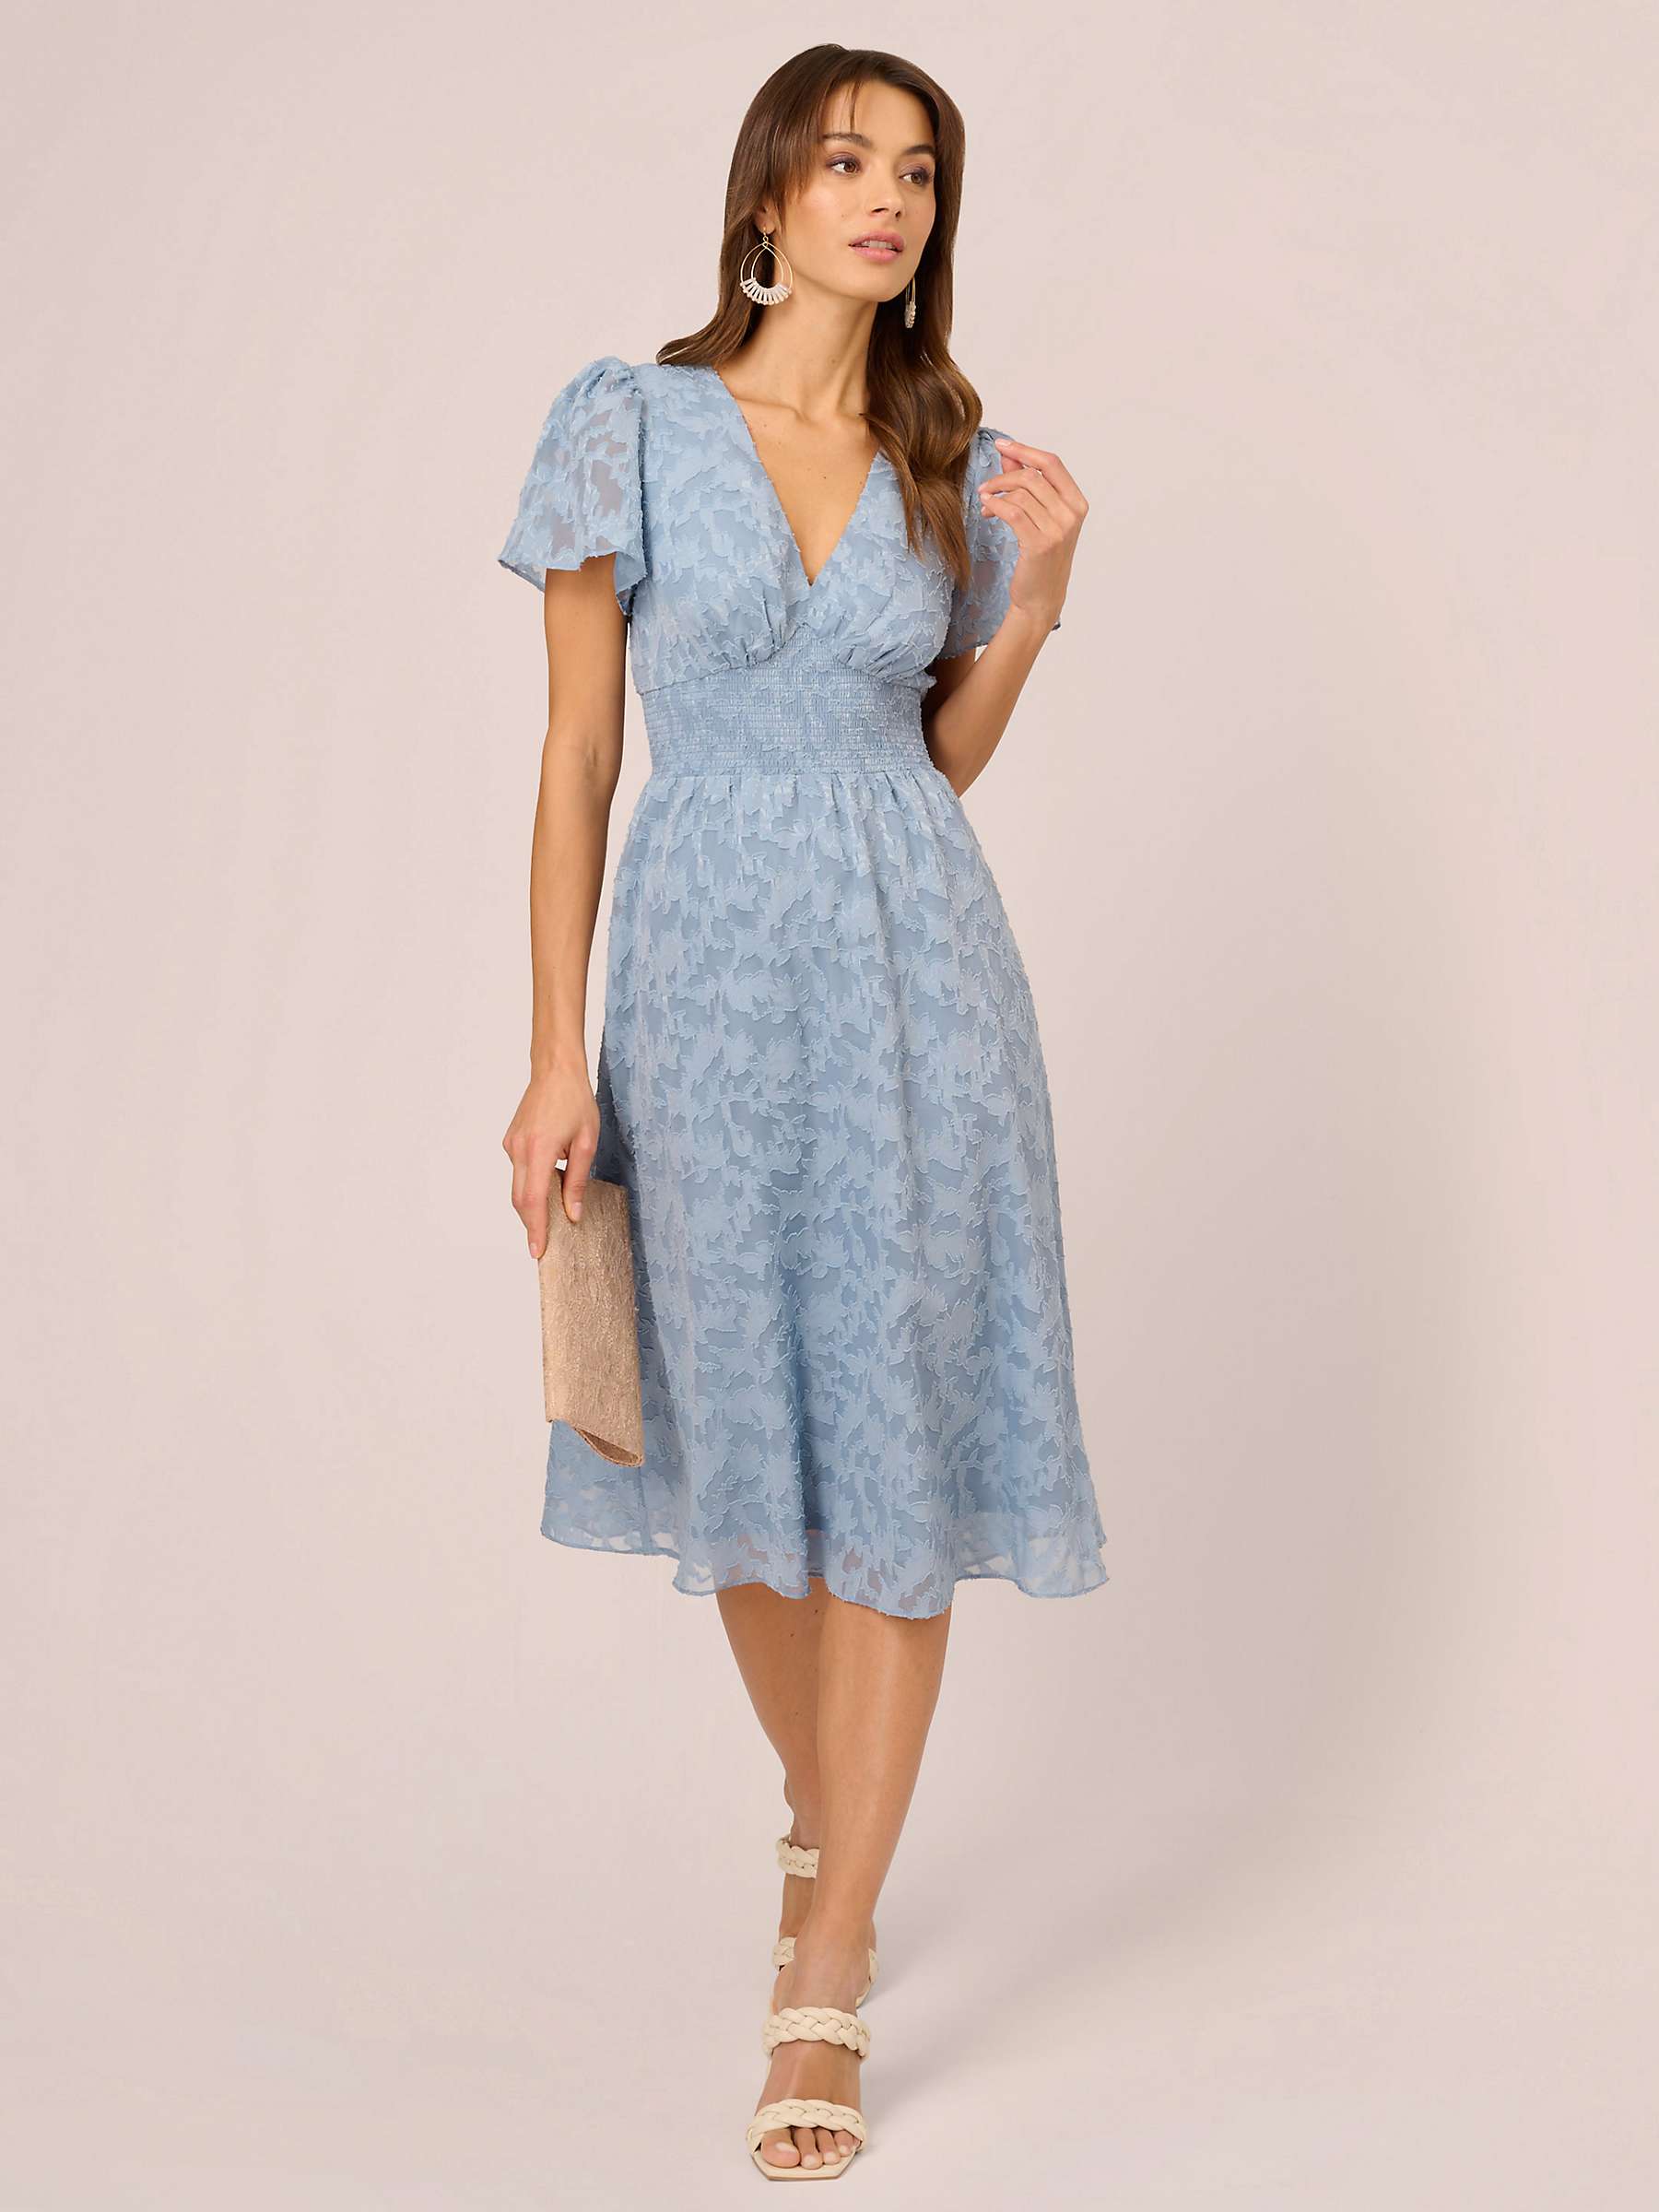 Buy Adrianna Papell Burnout Midi Dress, Dusty Blue Online at johnlewis.com